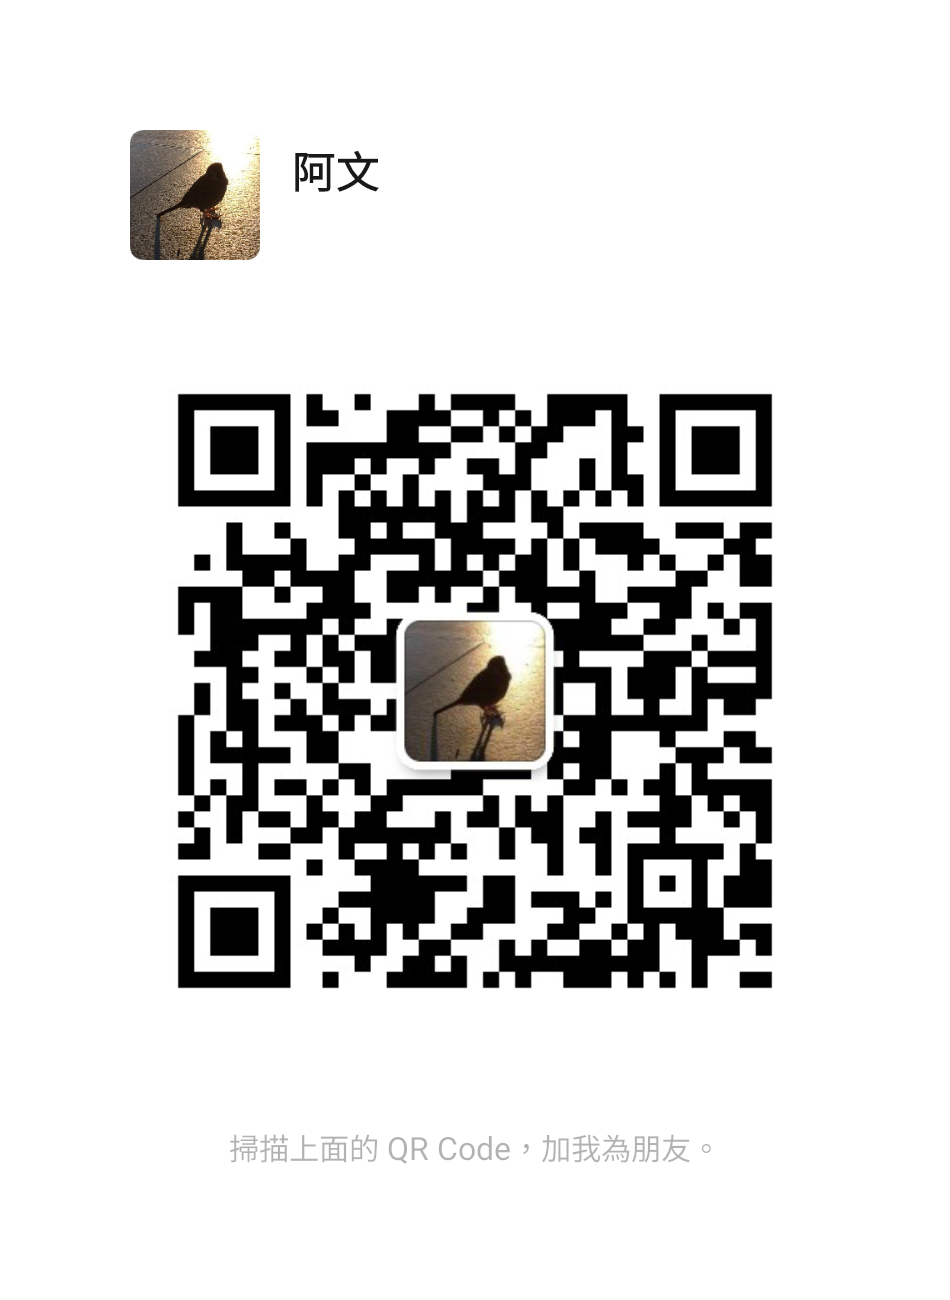 mmqrcode1719488492457.png